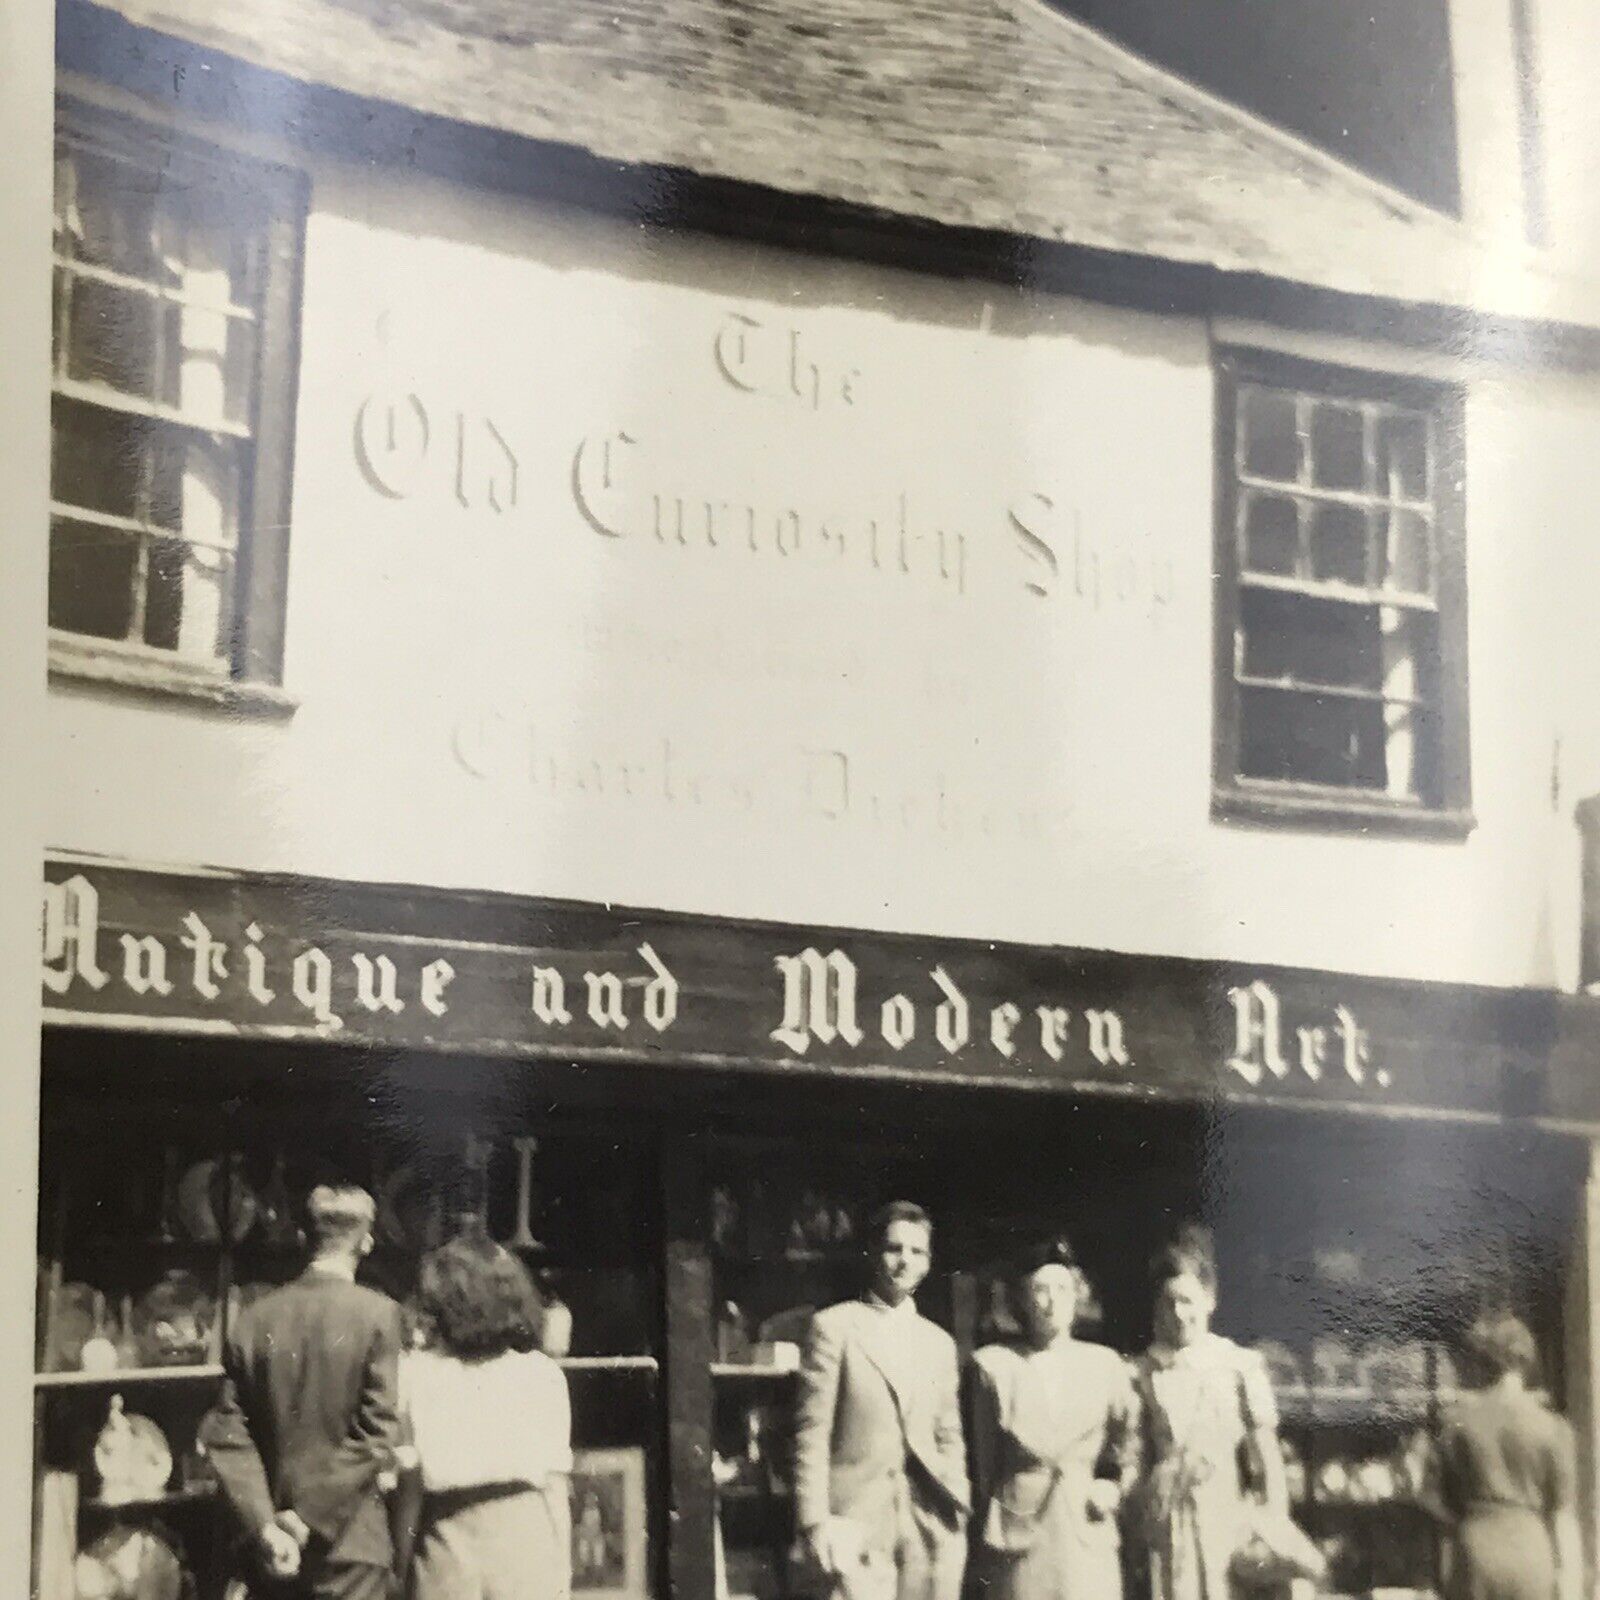 Vintage Sepia Photo Old Curiosity Shop Charles Dickens Front Entrance England 